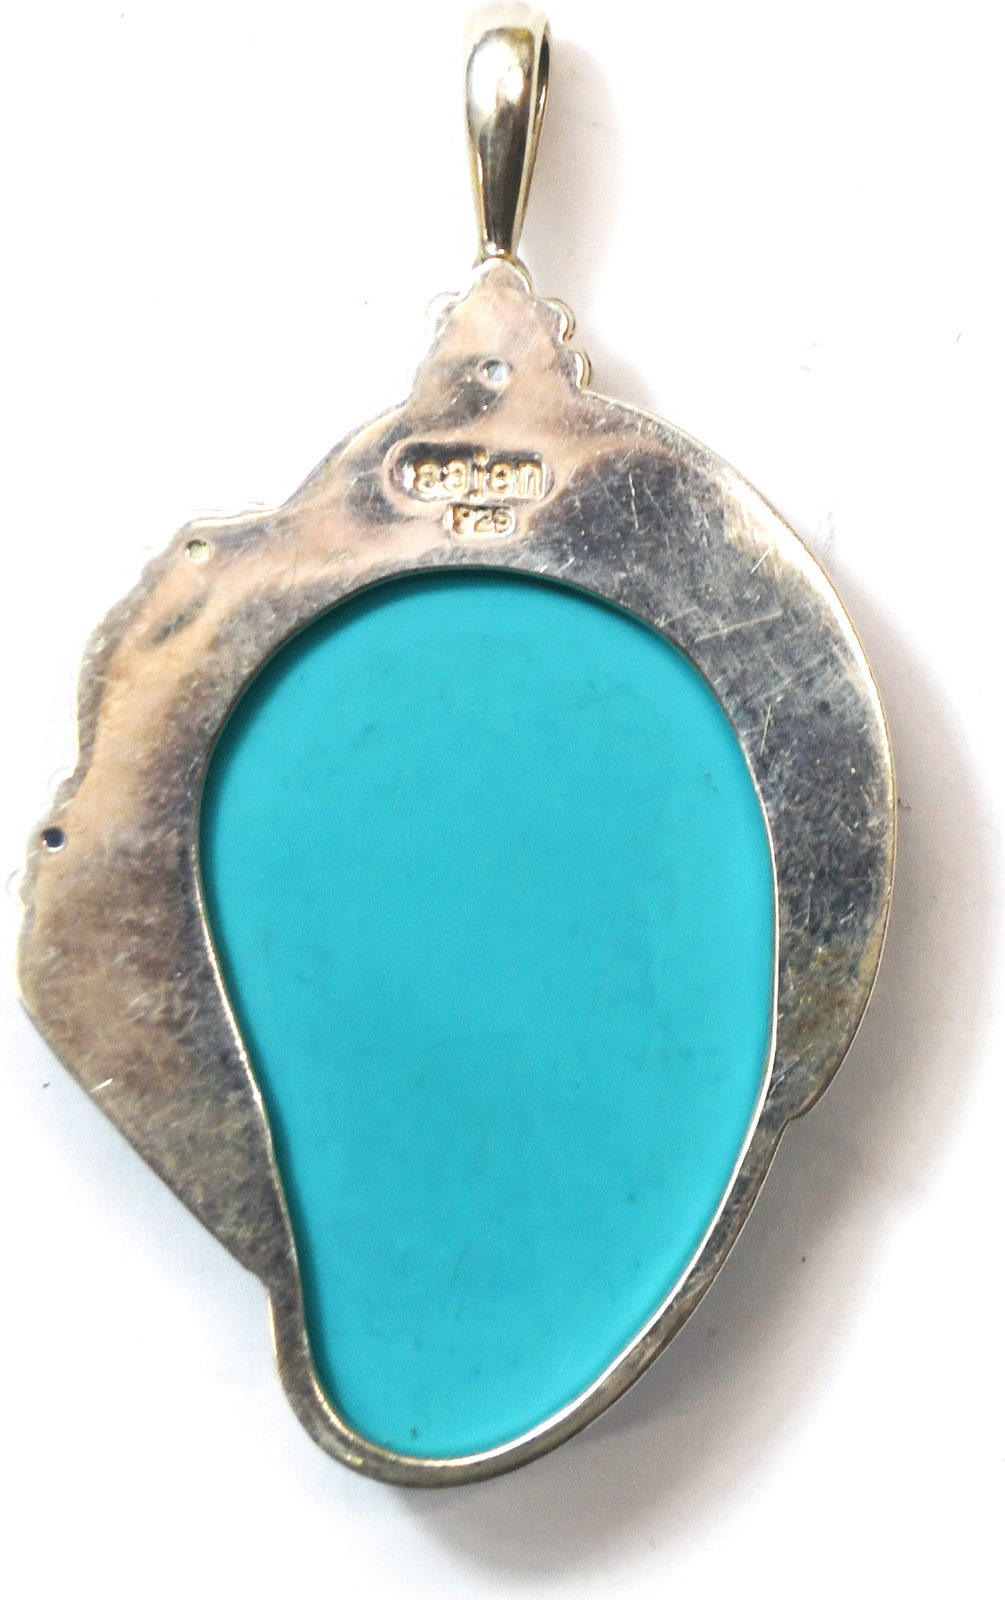 Sajen Large Sterling Silver Turquoise Goddess Head MOP Pendant 72mm x 43mm